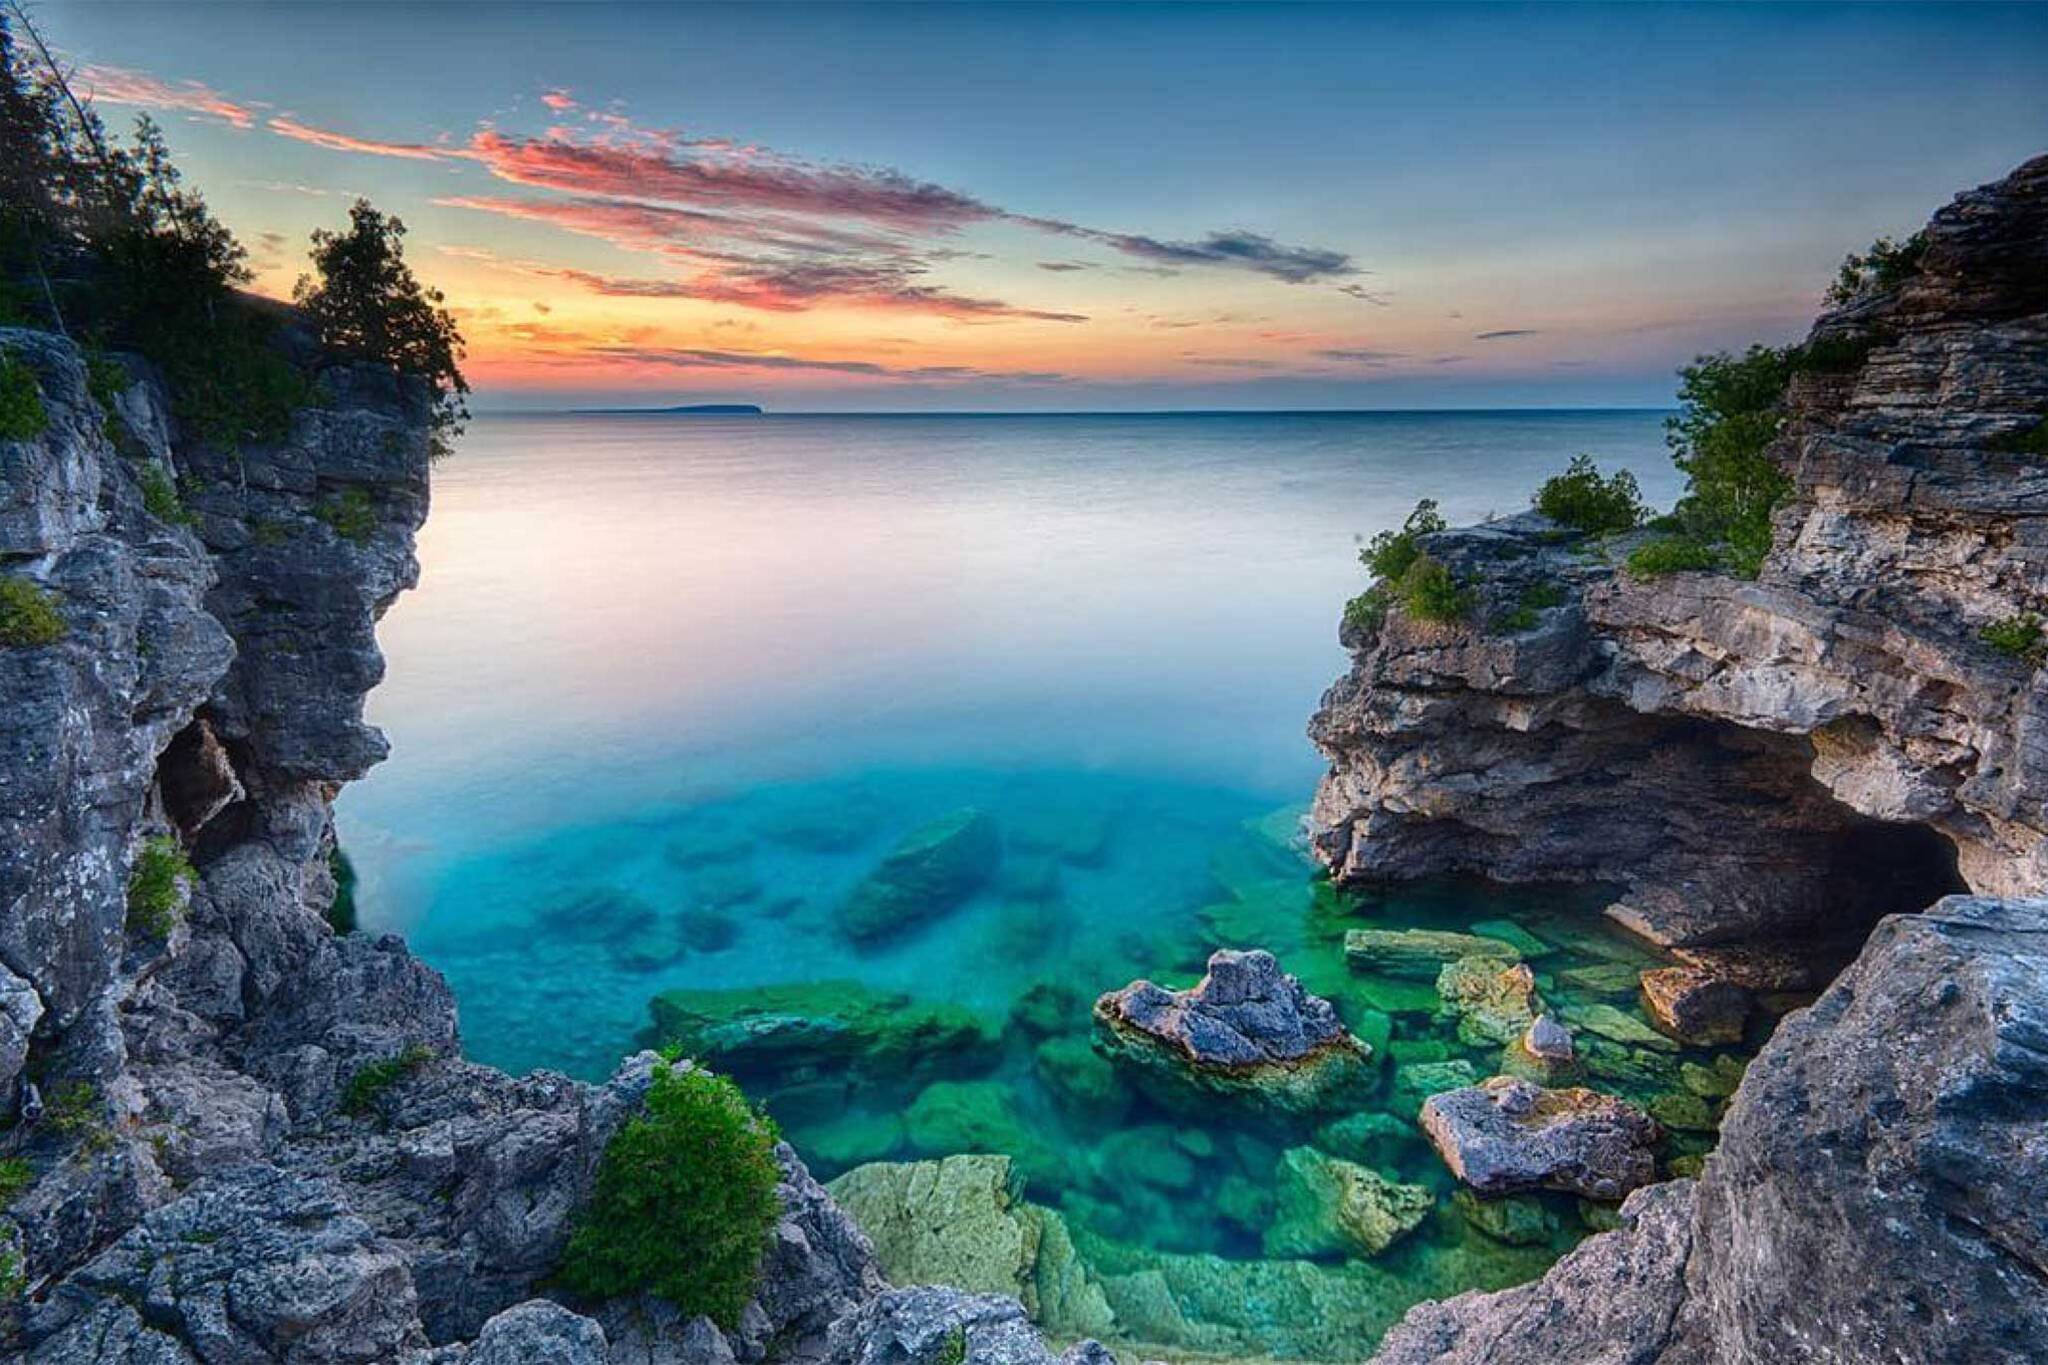 This stunning trail in Ontario is home to turquoise waters